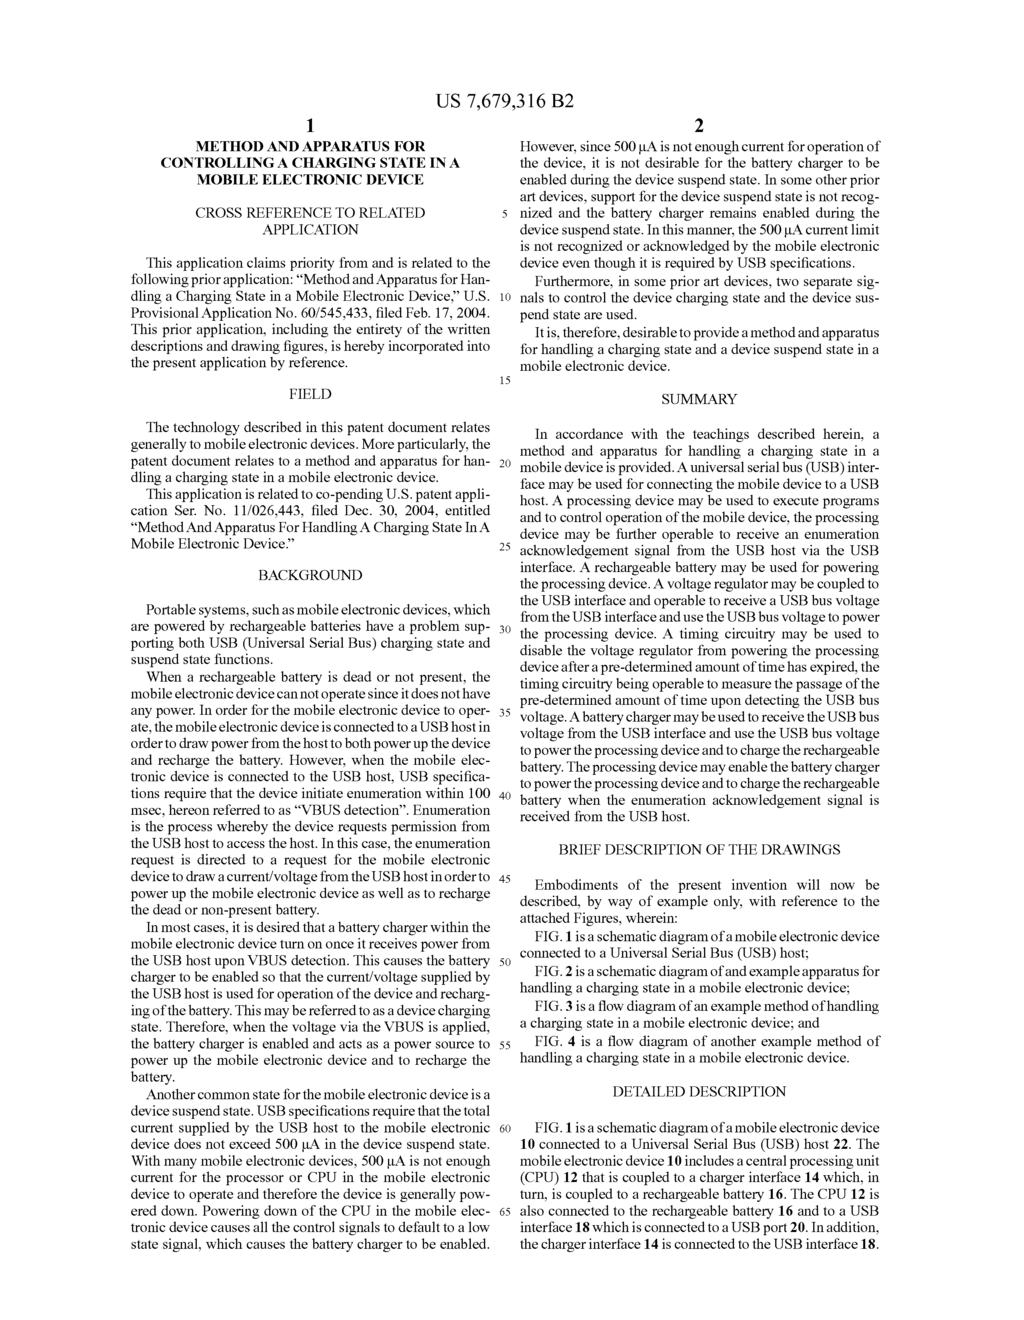 1. METHOD AND APPARATUS FOR CONTROLLING A CHARGING STATE INA MOBILE ELECTRONIC DEVICE CROSS REFERENCE TO RELATED APPLICATION This application claims priority from and is related to the following